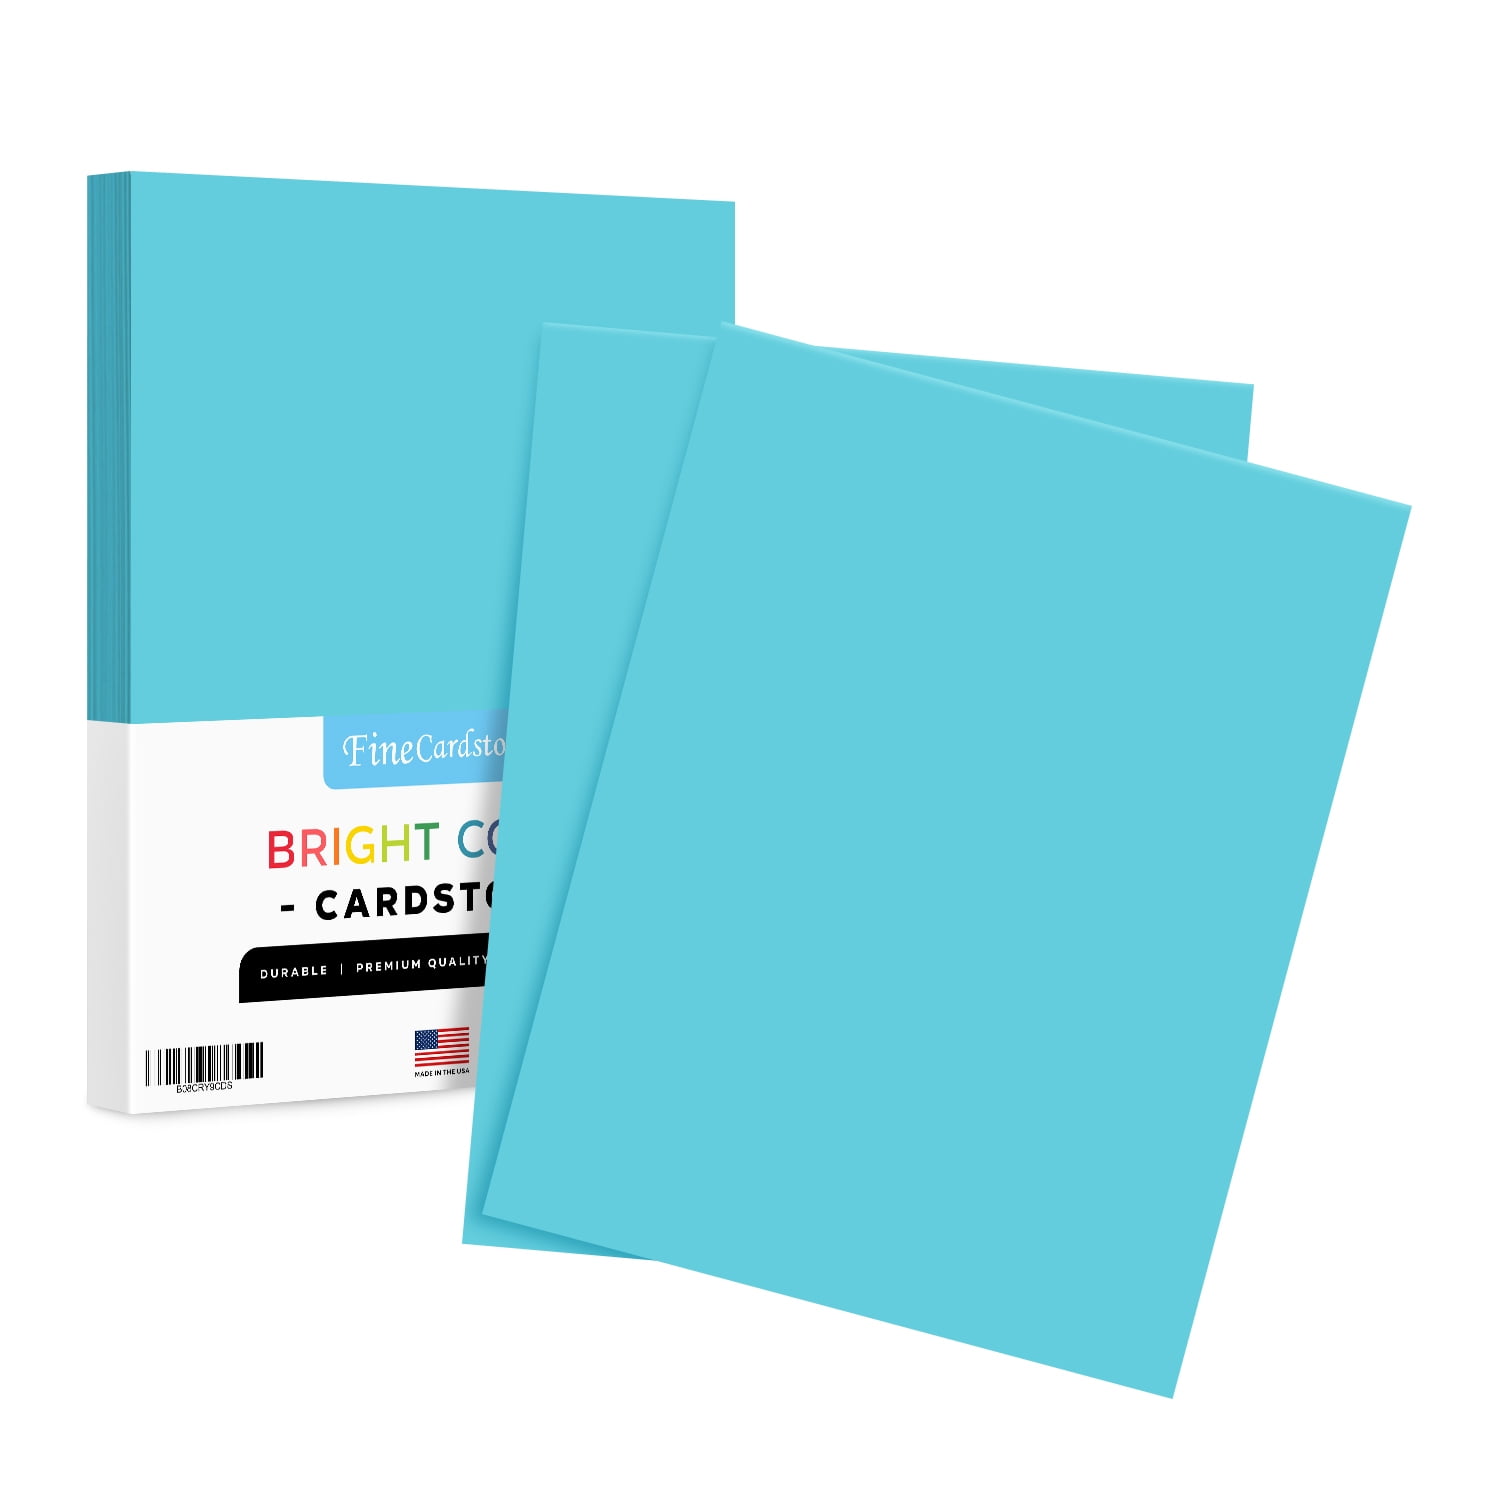 Superior Thick 65-lb Cardstock Acid & Lignin Free Premium Color Card Stock Paper 8.5 x 11 Holiday Crafting Arts and Crafts Perfect for School Supplies 250 Per Pack Cosmic orange 